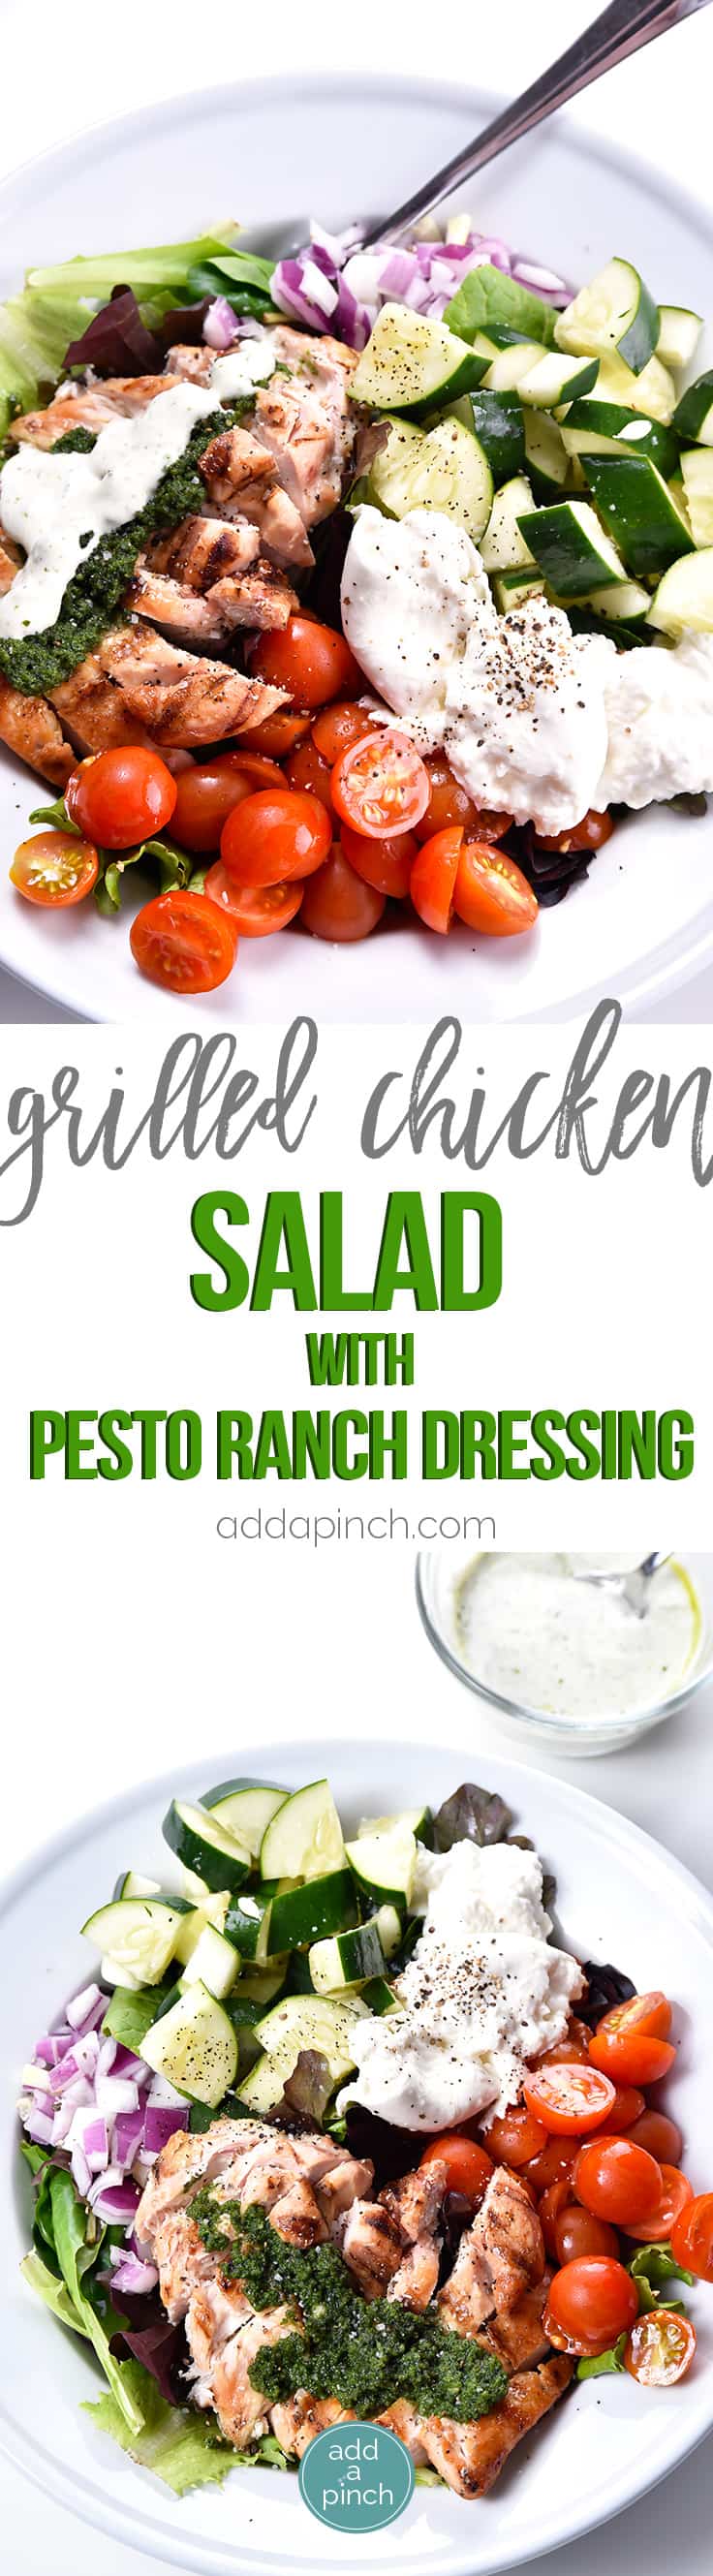  Grilled Chicken Salad with Pesto Ranch Dressing Recipe makes a delicious salad with cucumbers, tomatoes, onion, mozzarella topped with grilled chicken and a pesto ranch dressing! // addapinch.com